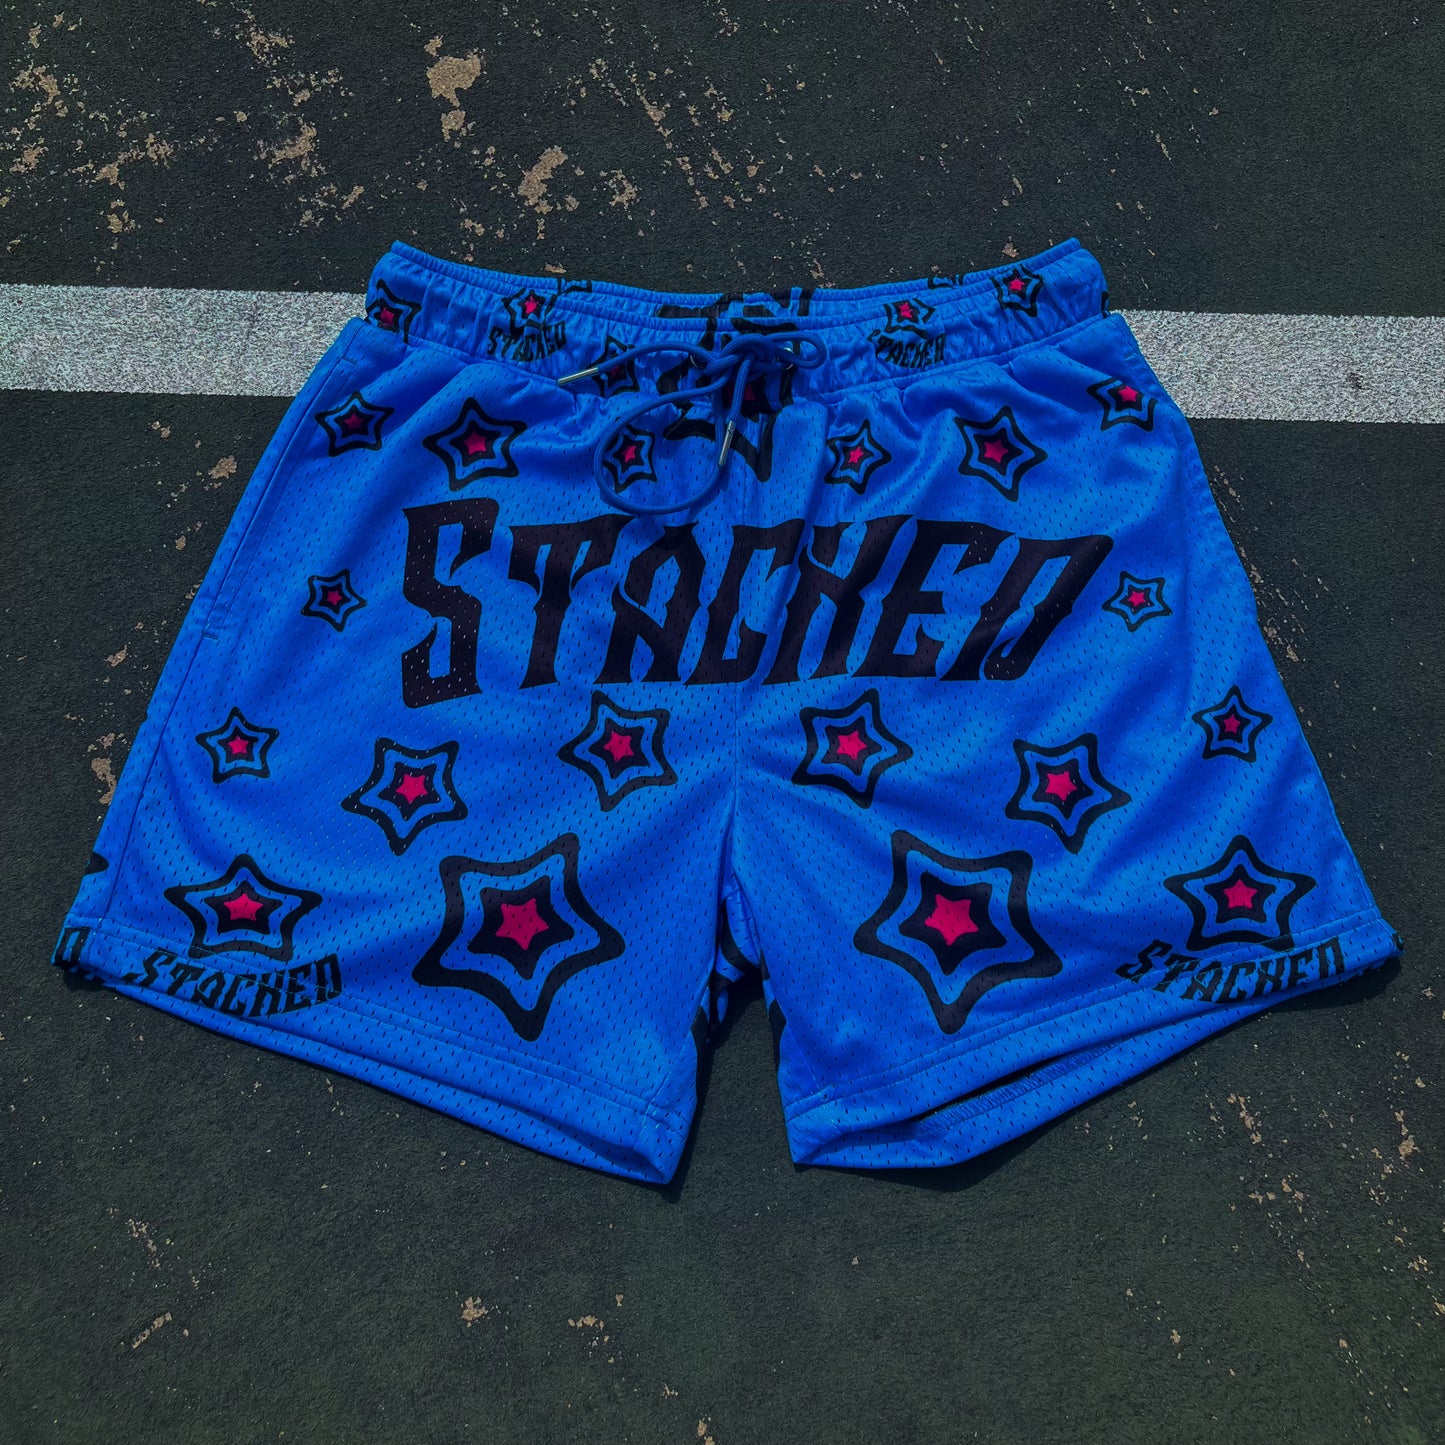 BLUE RASPBERRY STACKED MESH SHORTS – Strictly Stacked